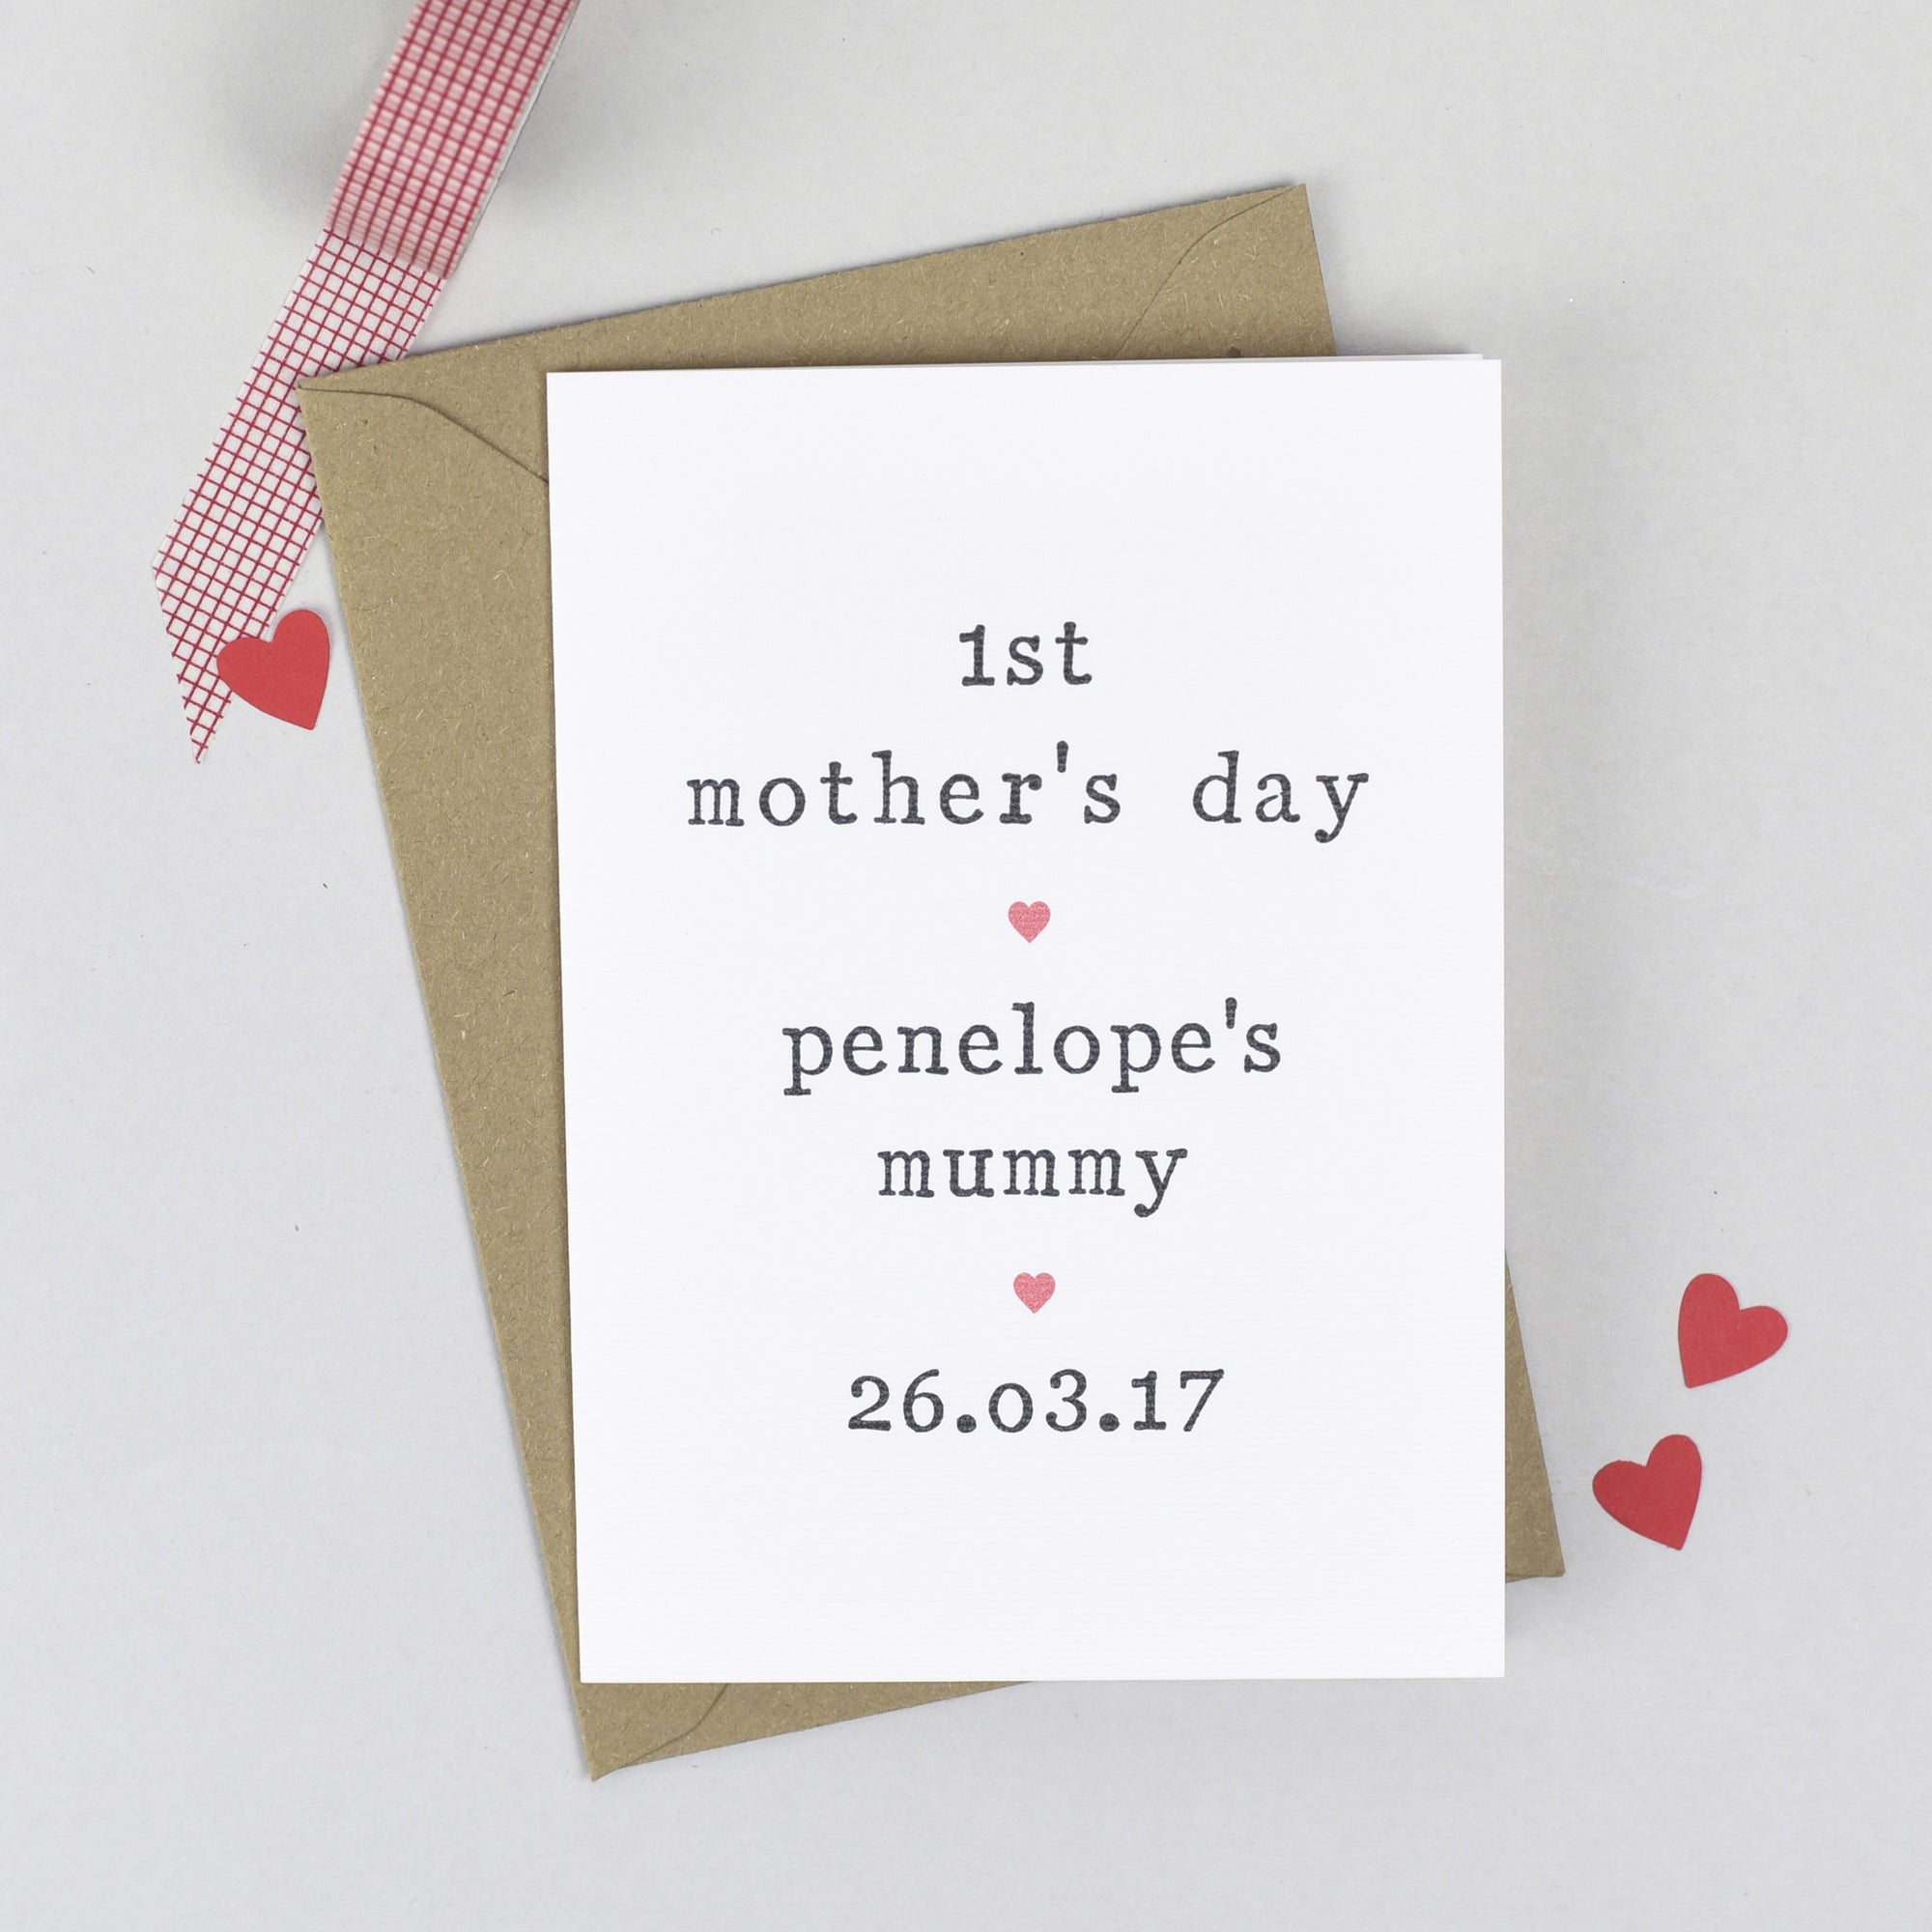 Personalised '1st Mother's Day' Card